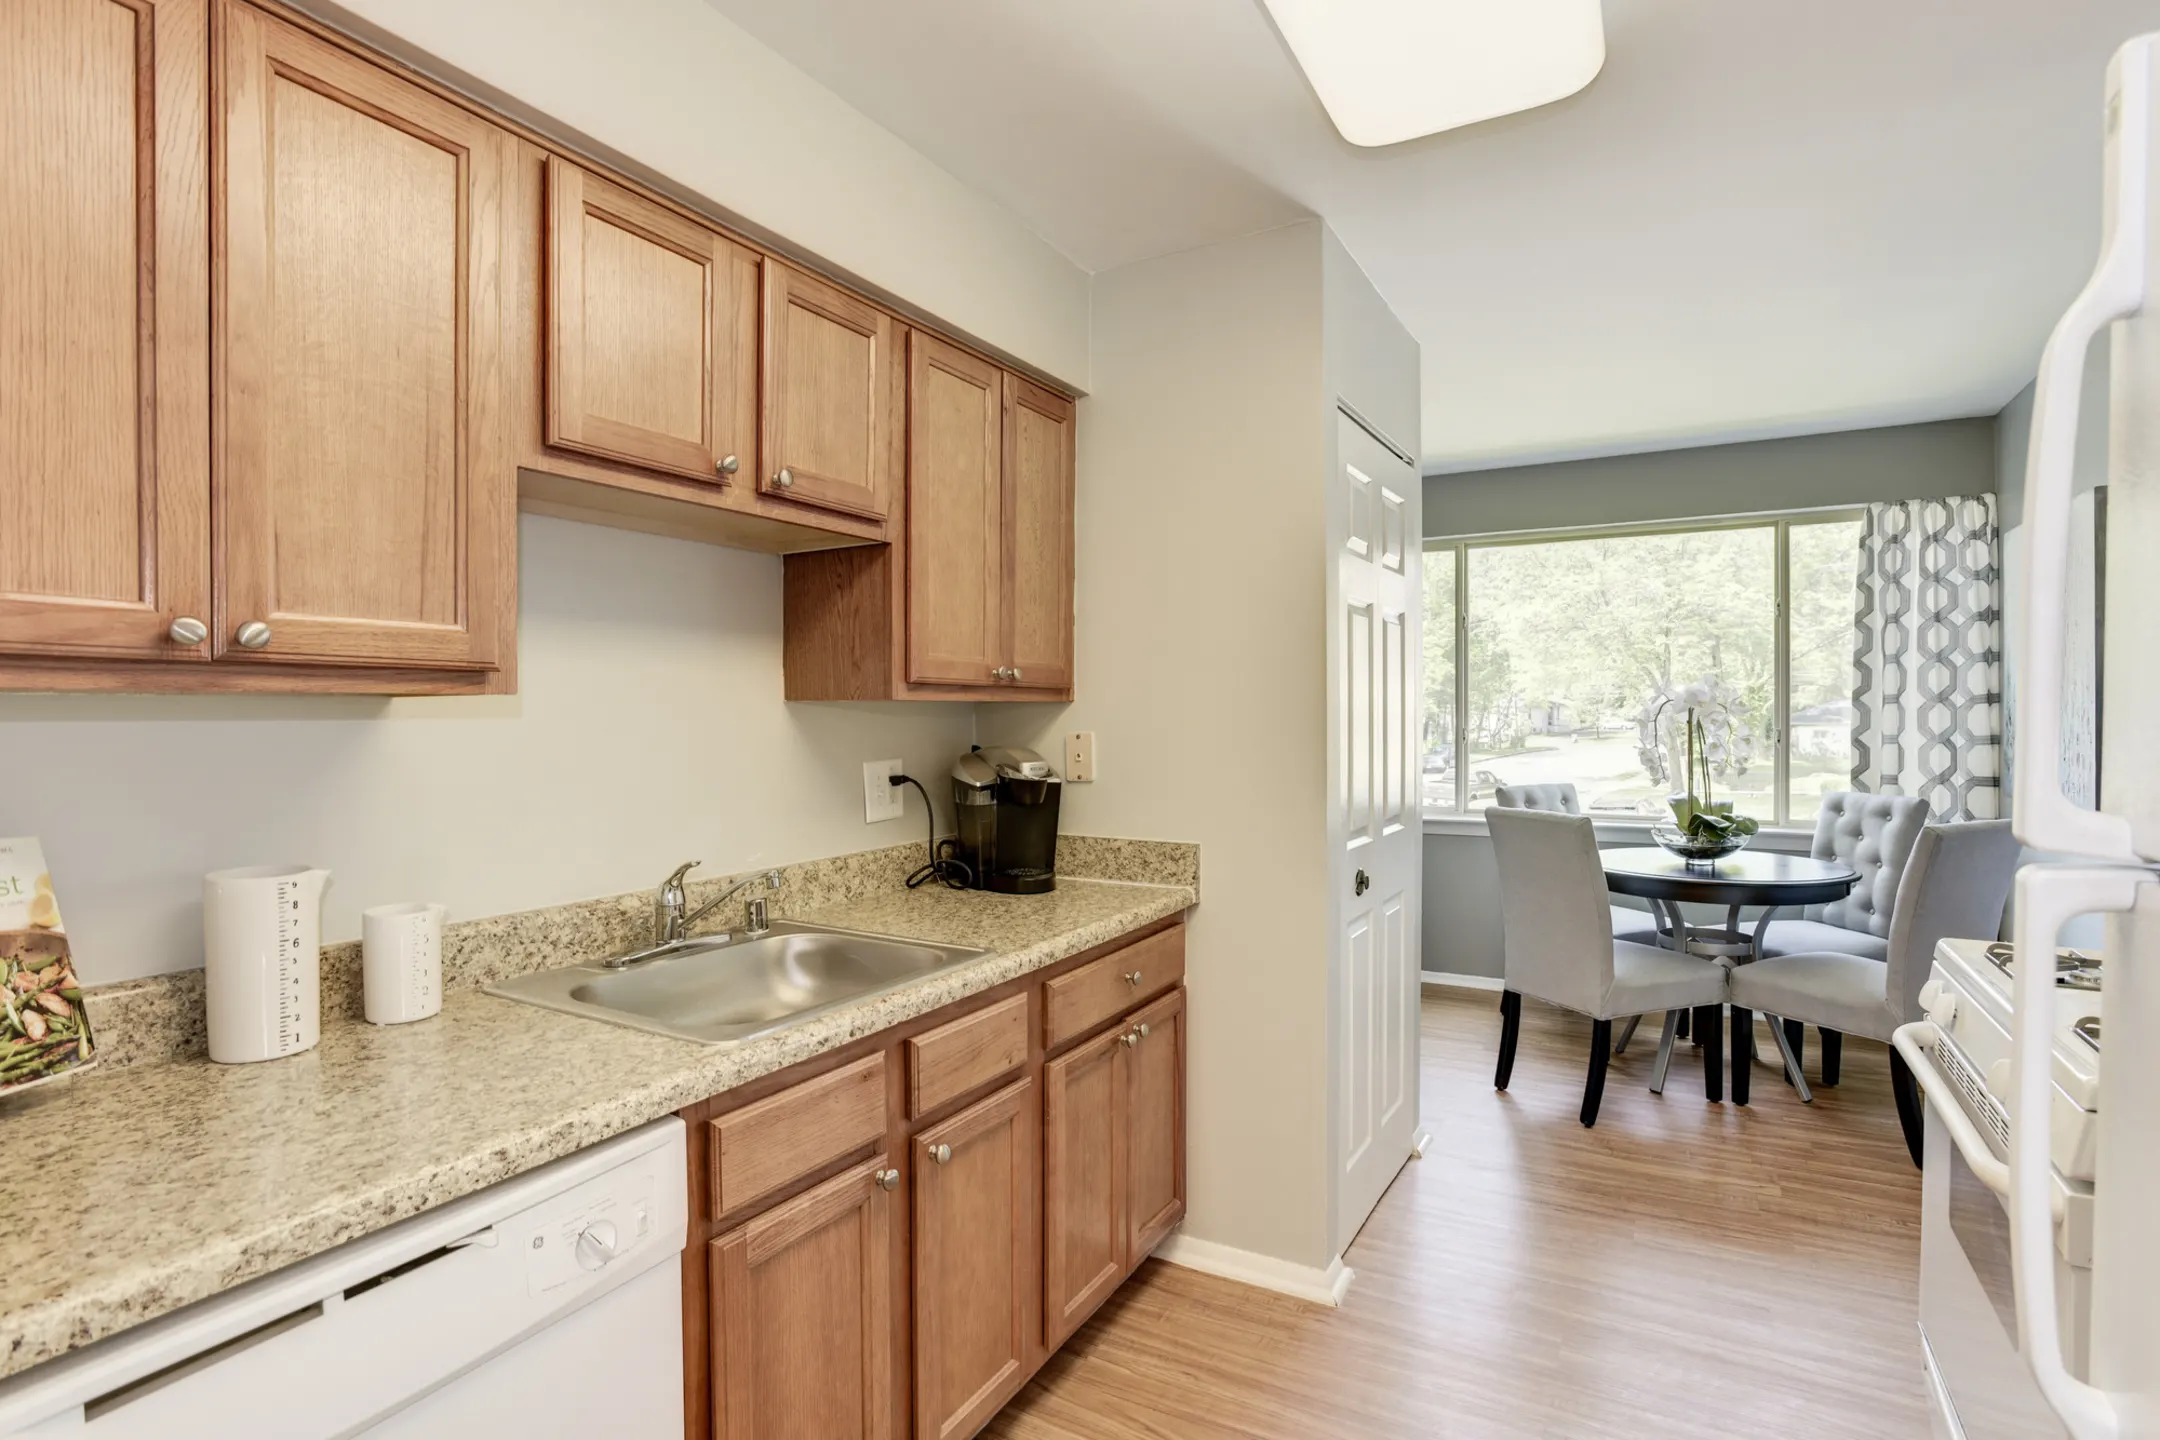 Kitchen - Satyr Hill Apartments - Parkville, MD